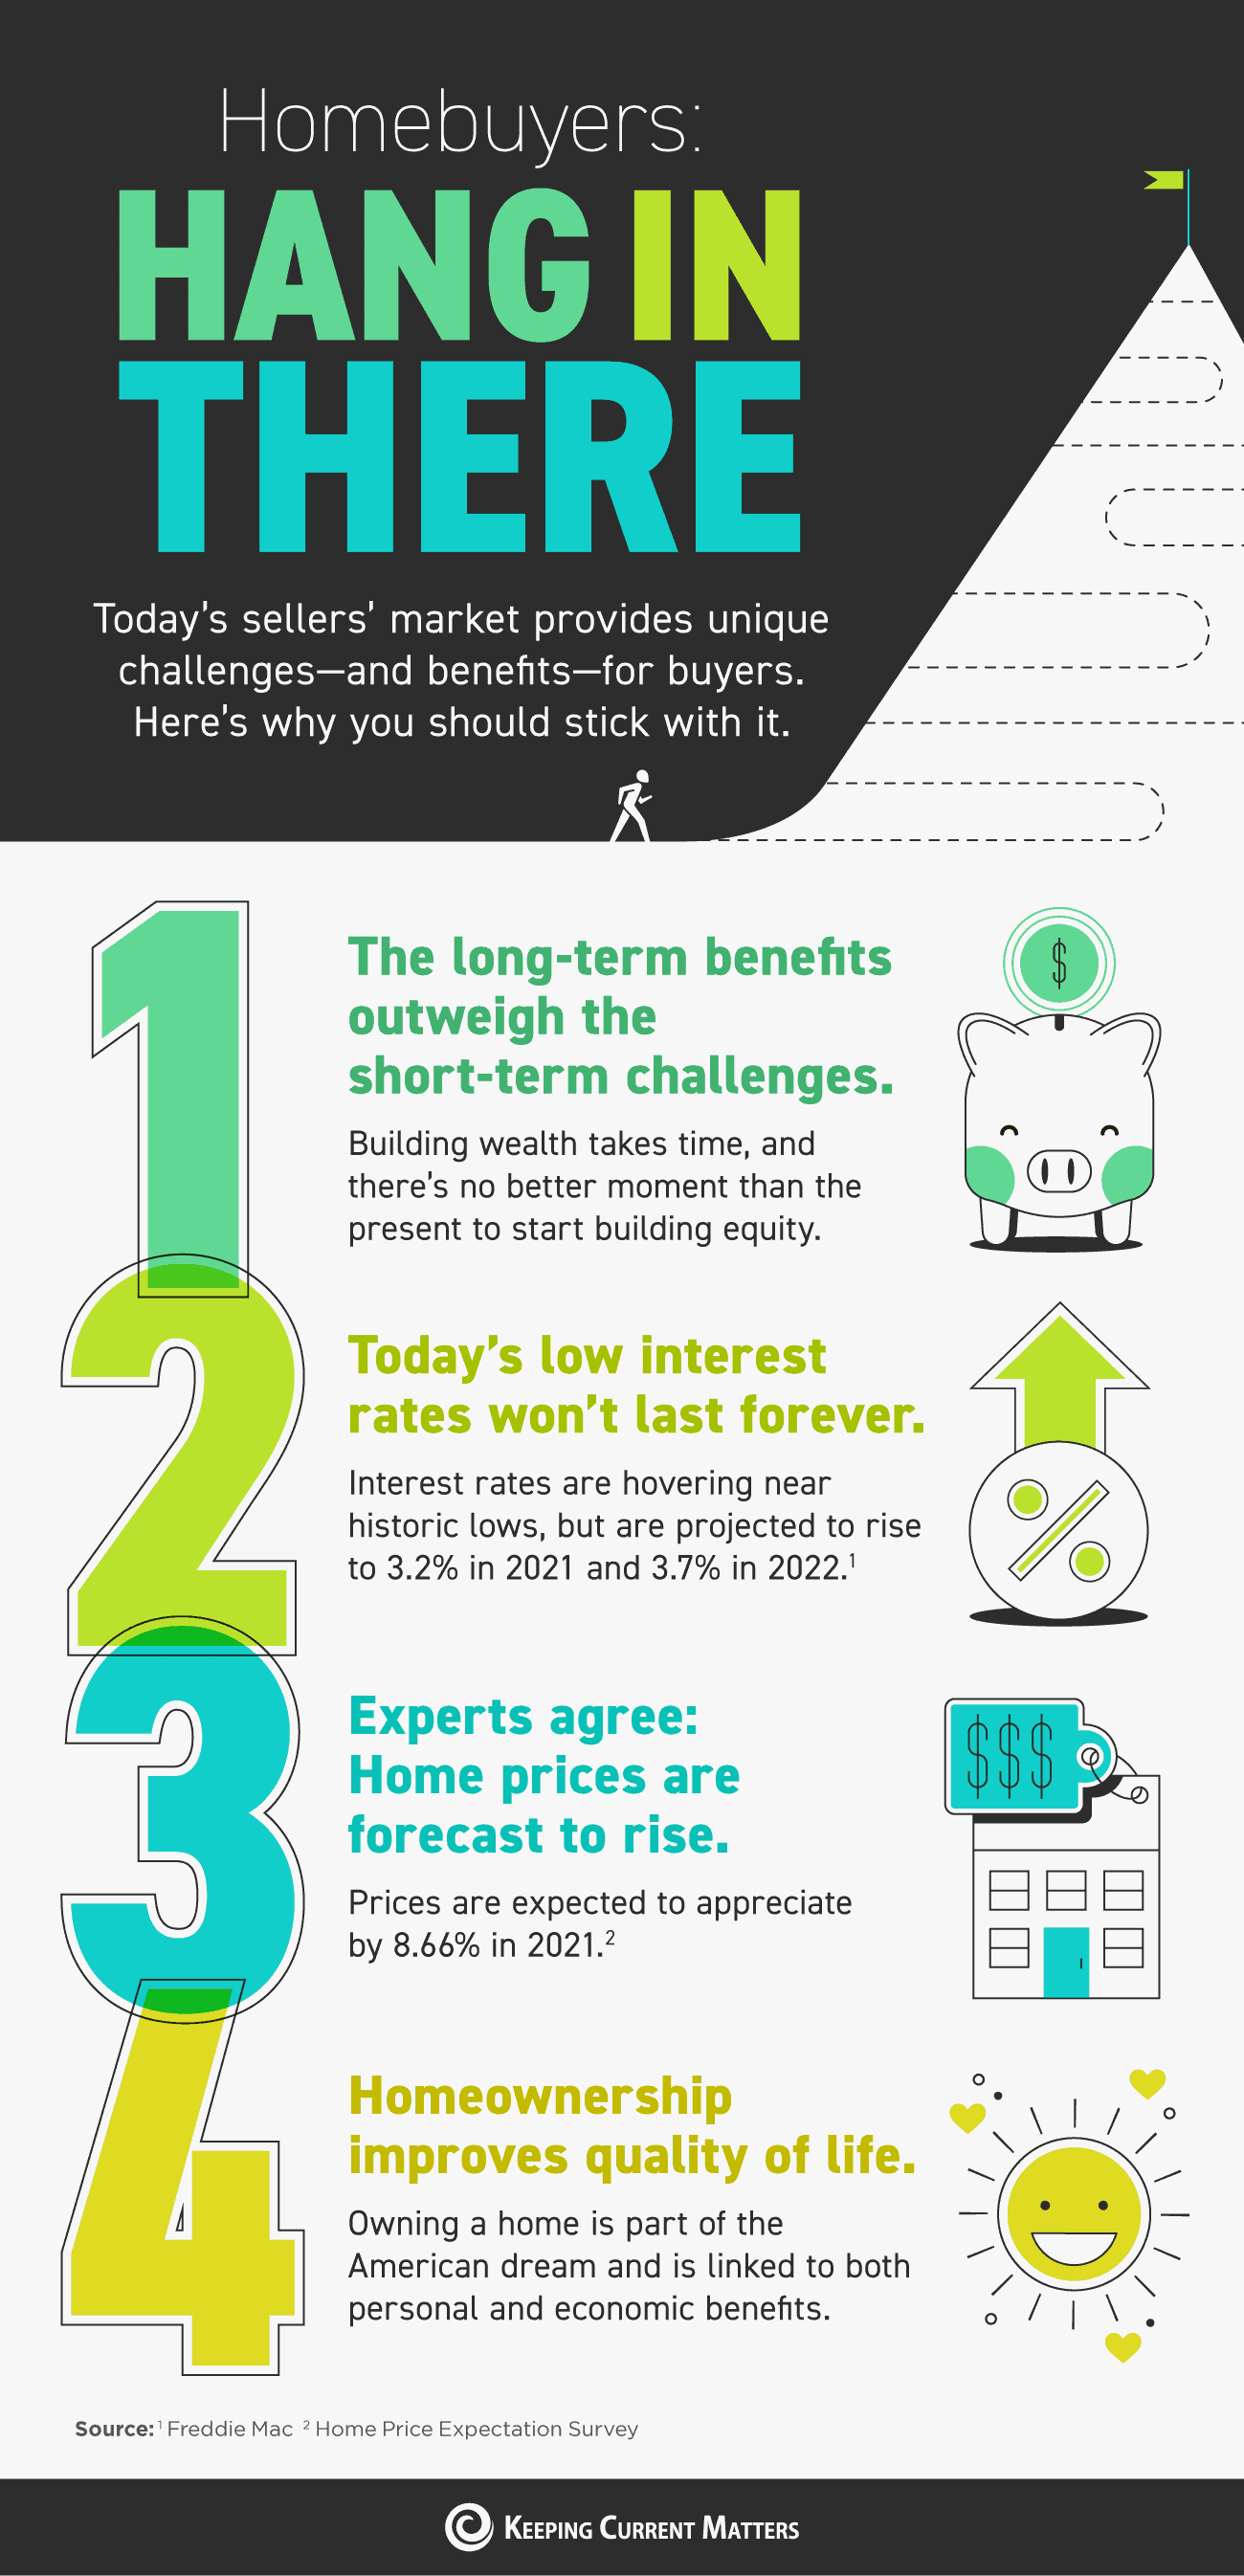 Homebuyers: Hang in There [INFOGRAPHIC] | Keeping Current Matters